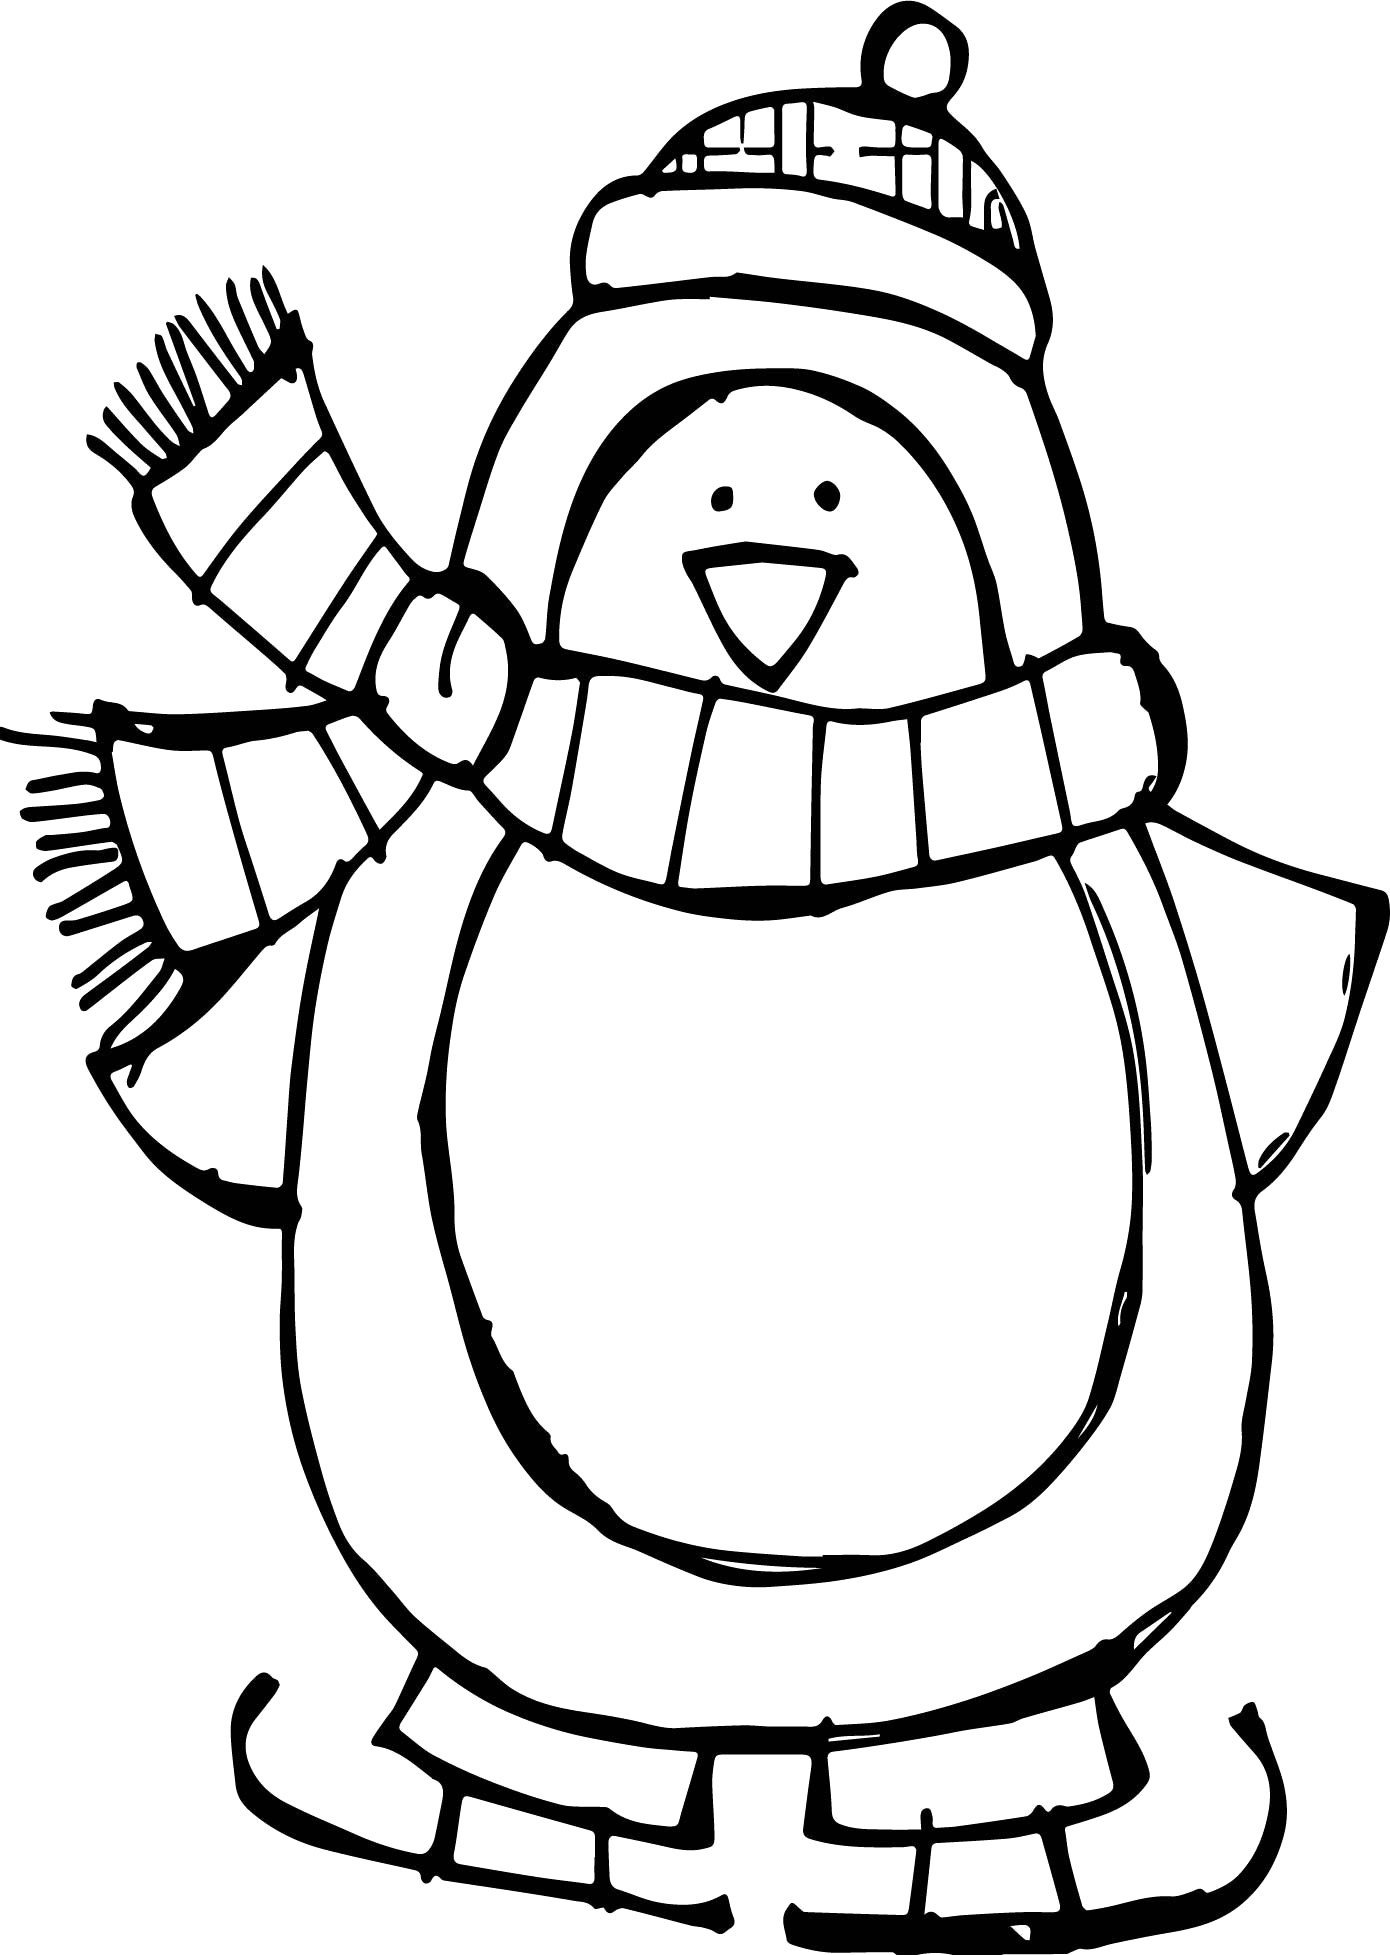 penguin-outline-drawing-at-paintingvalley-explore-collection-of-penguin-outline-drawing